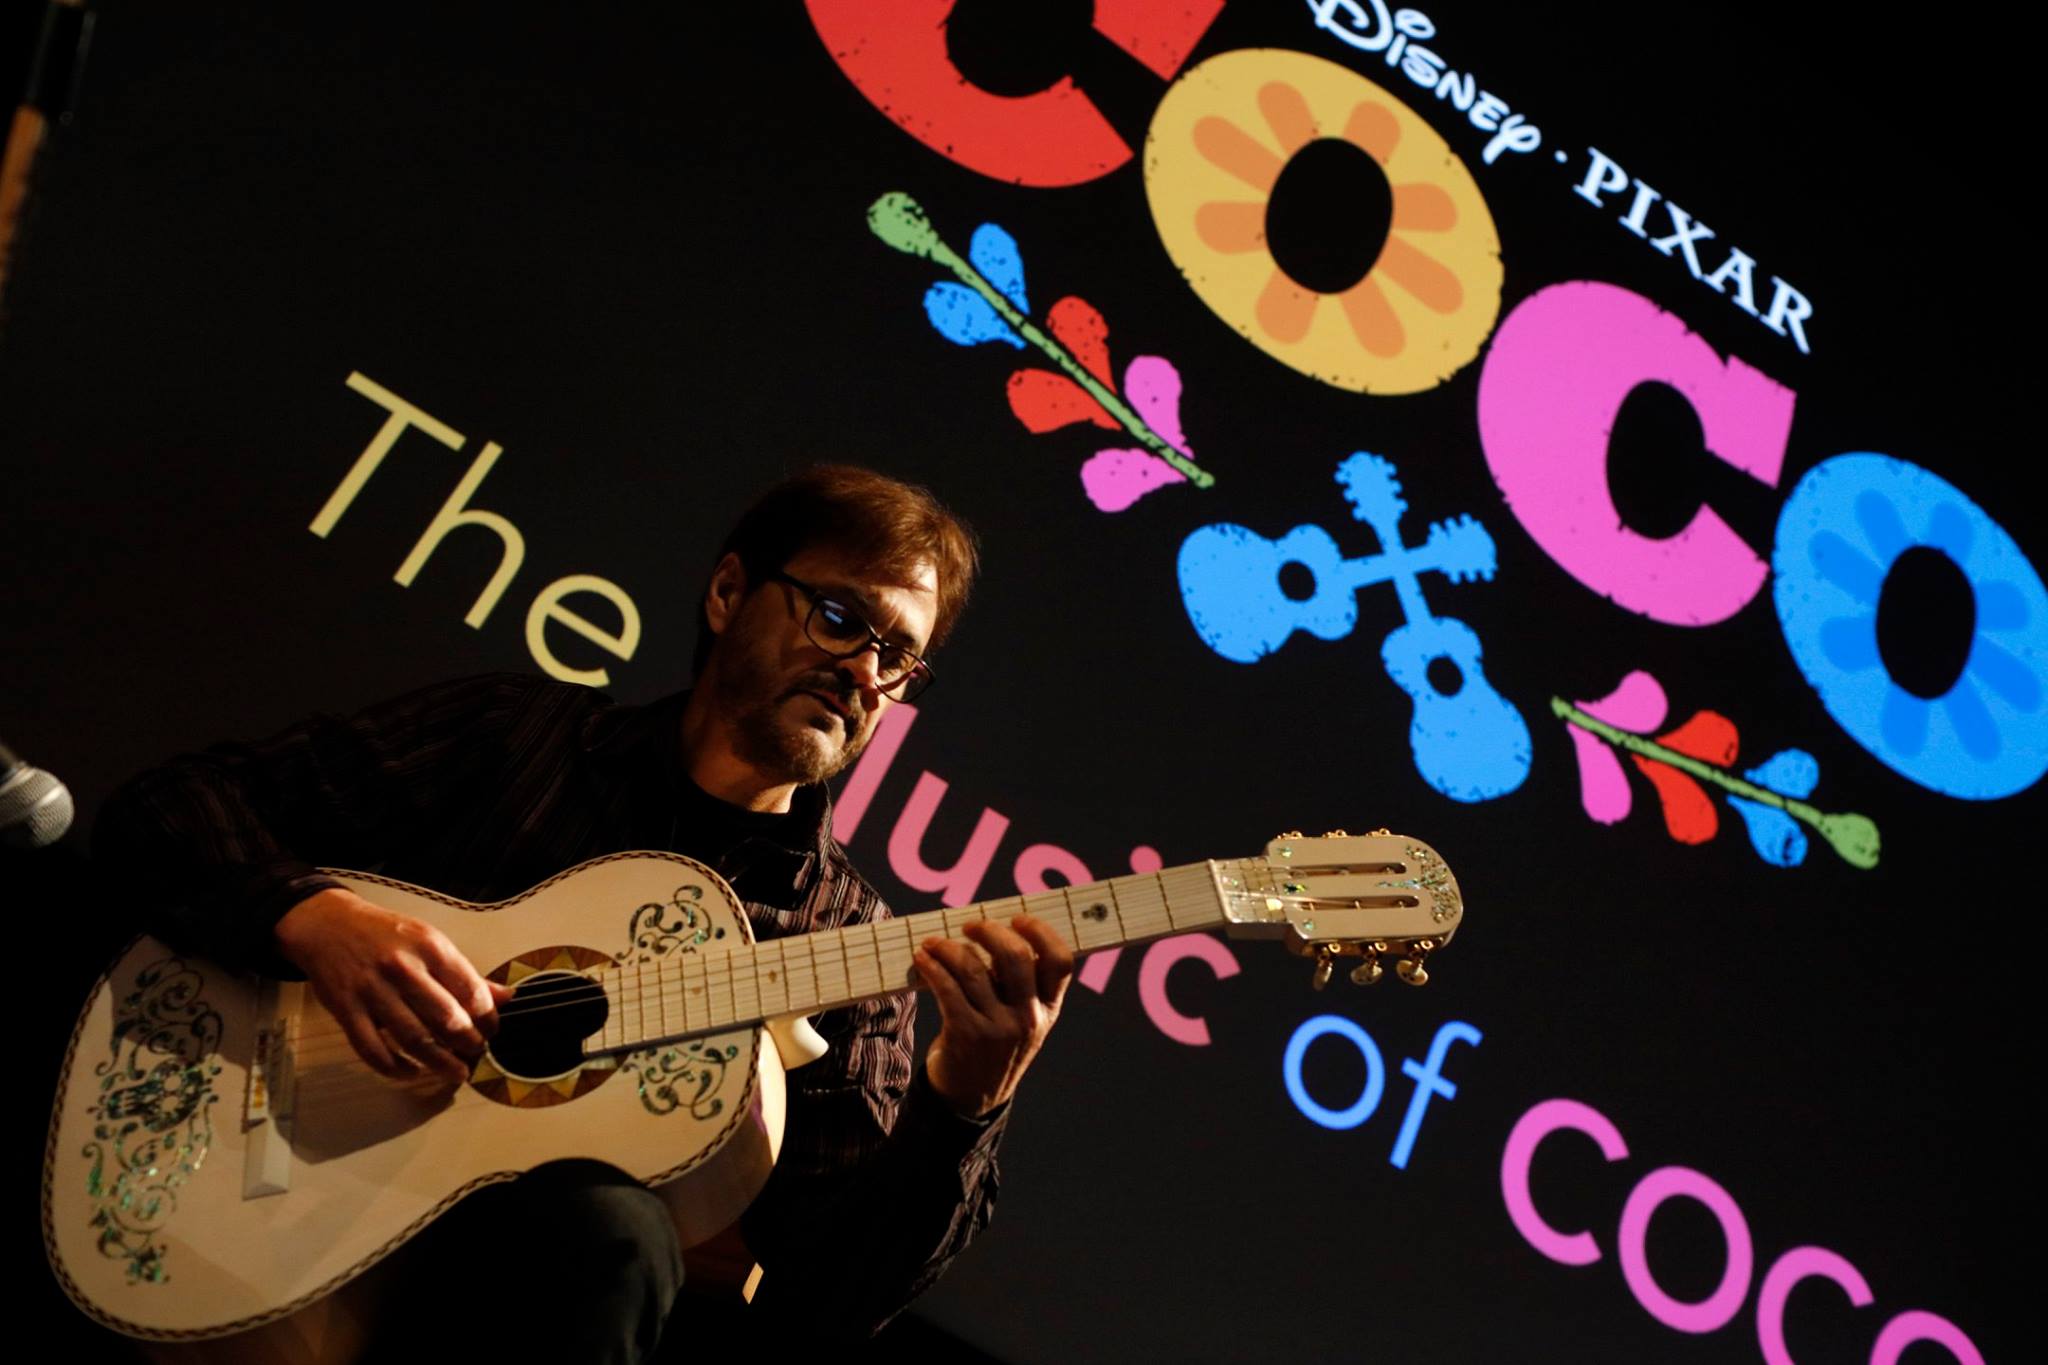 The Music of COCO